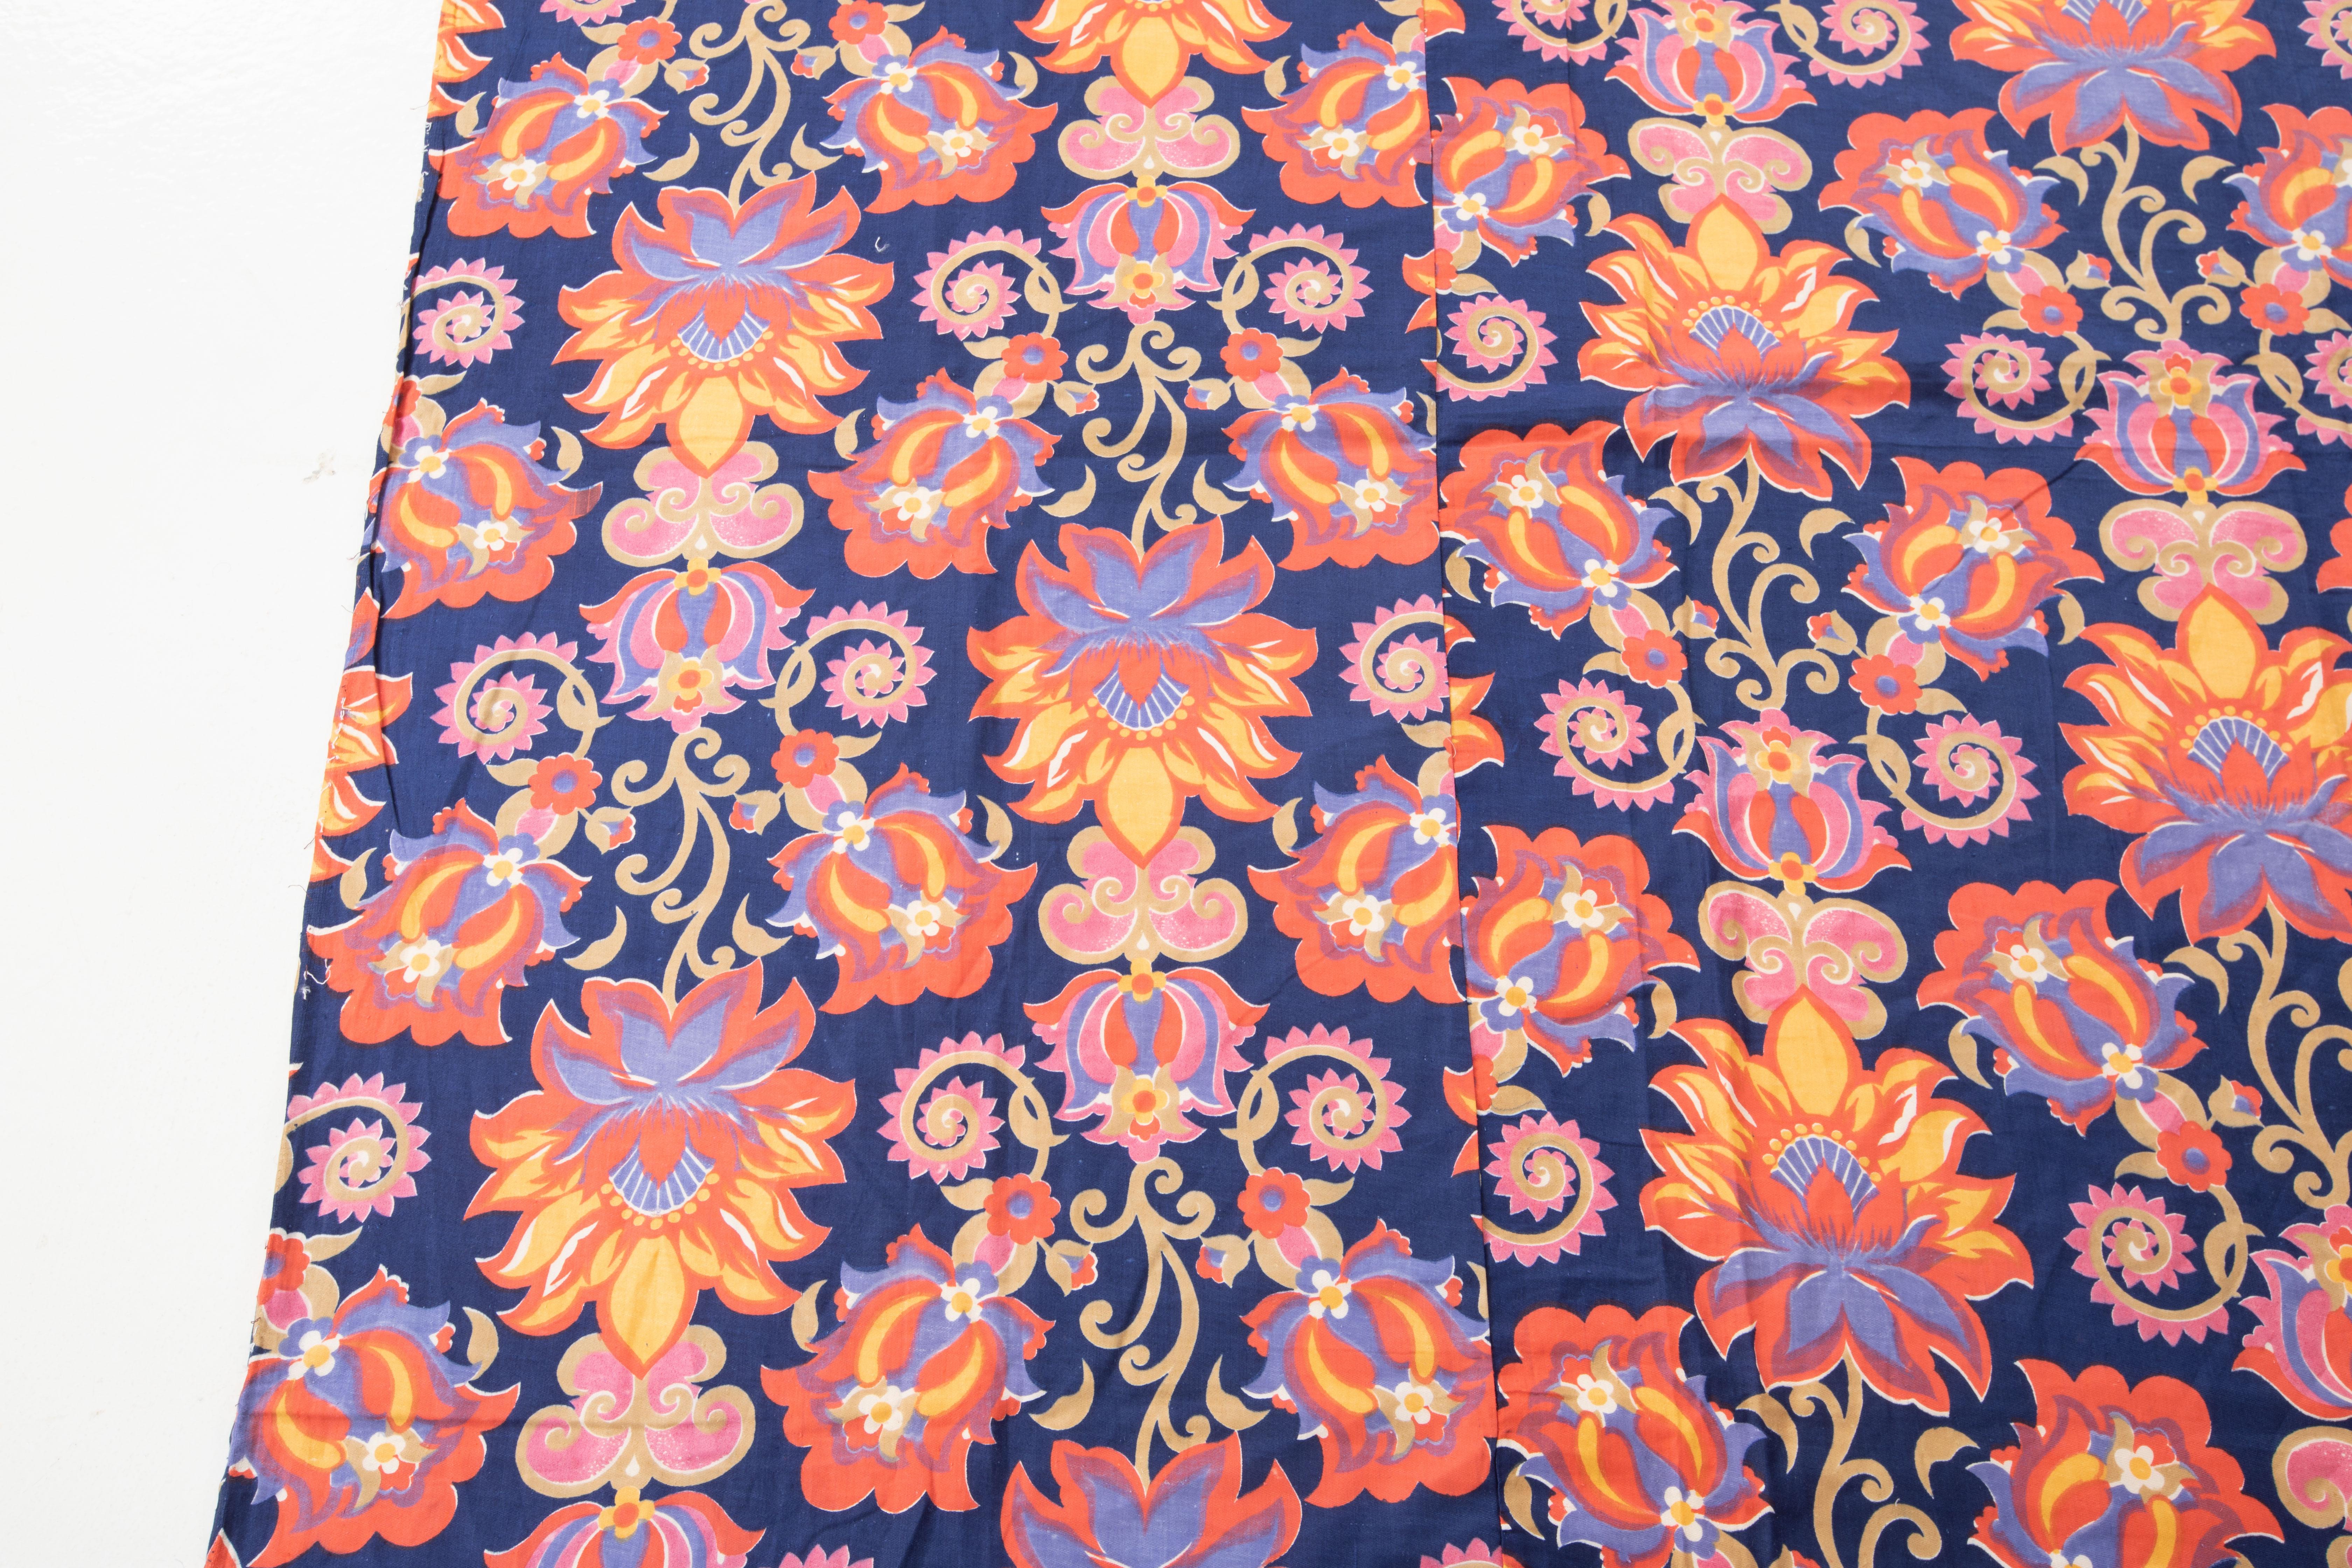 Russian Roller Printed Cotton Fabric Panel, Mid-20th Century or Earlier For Sale 2